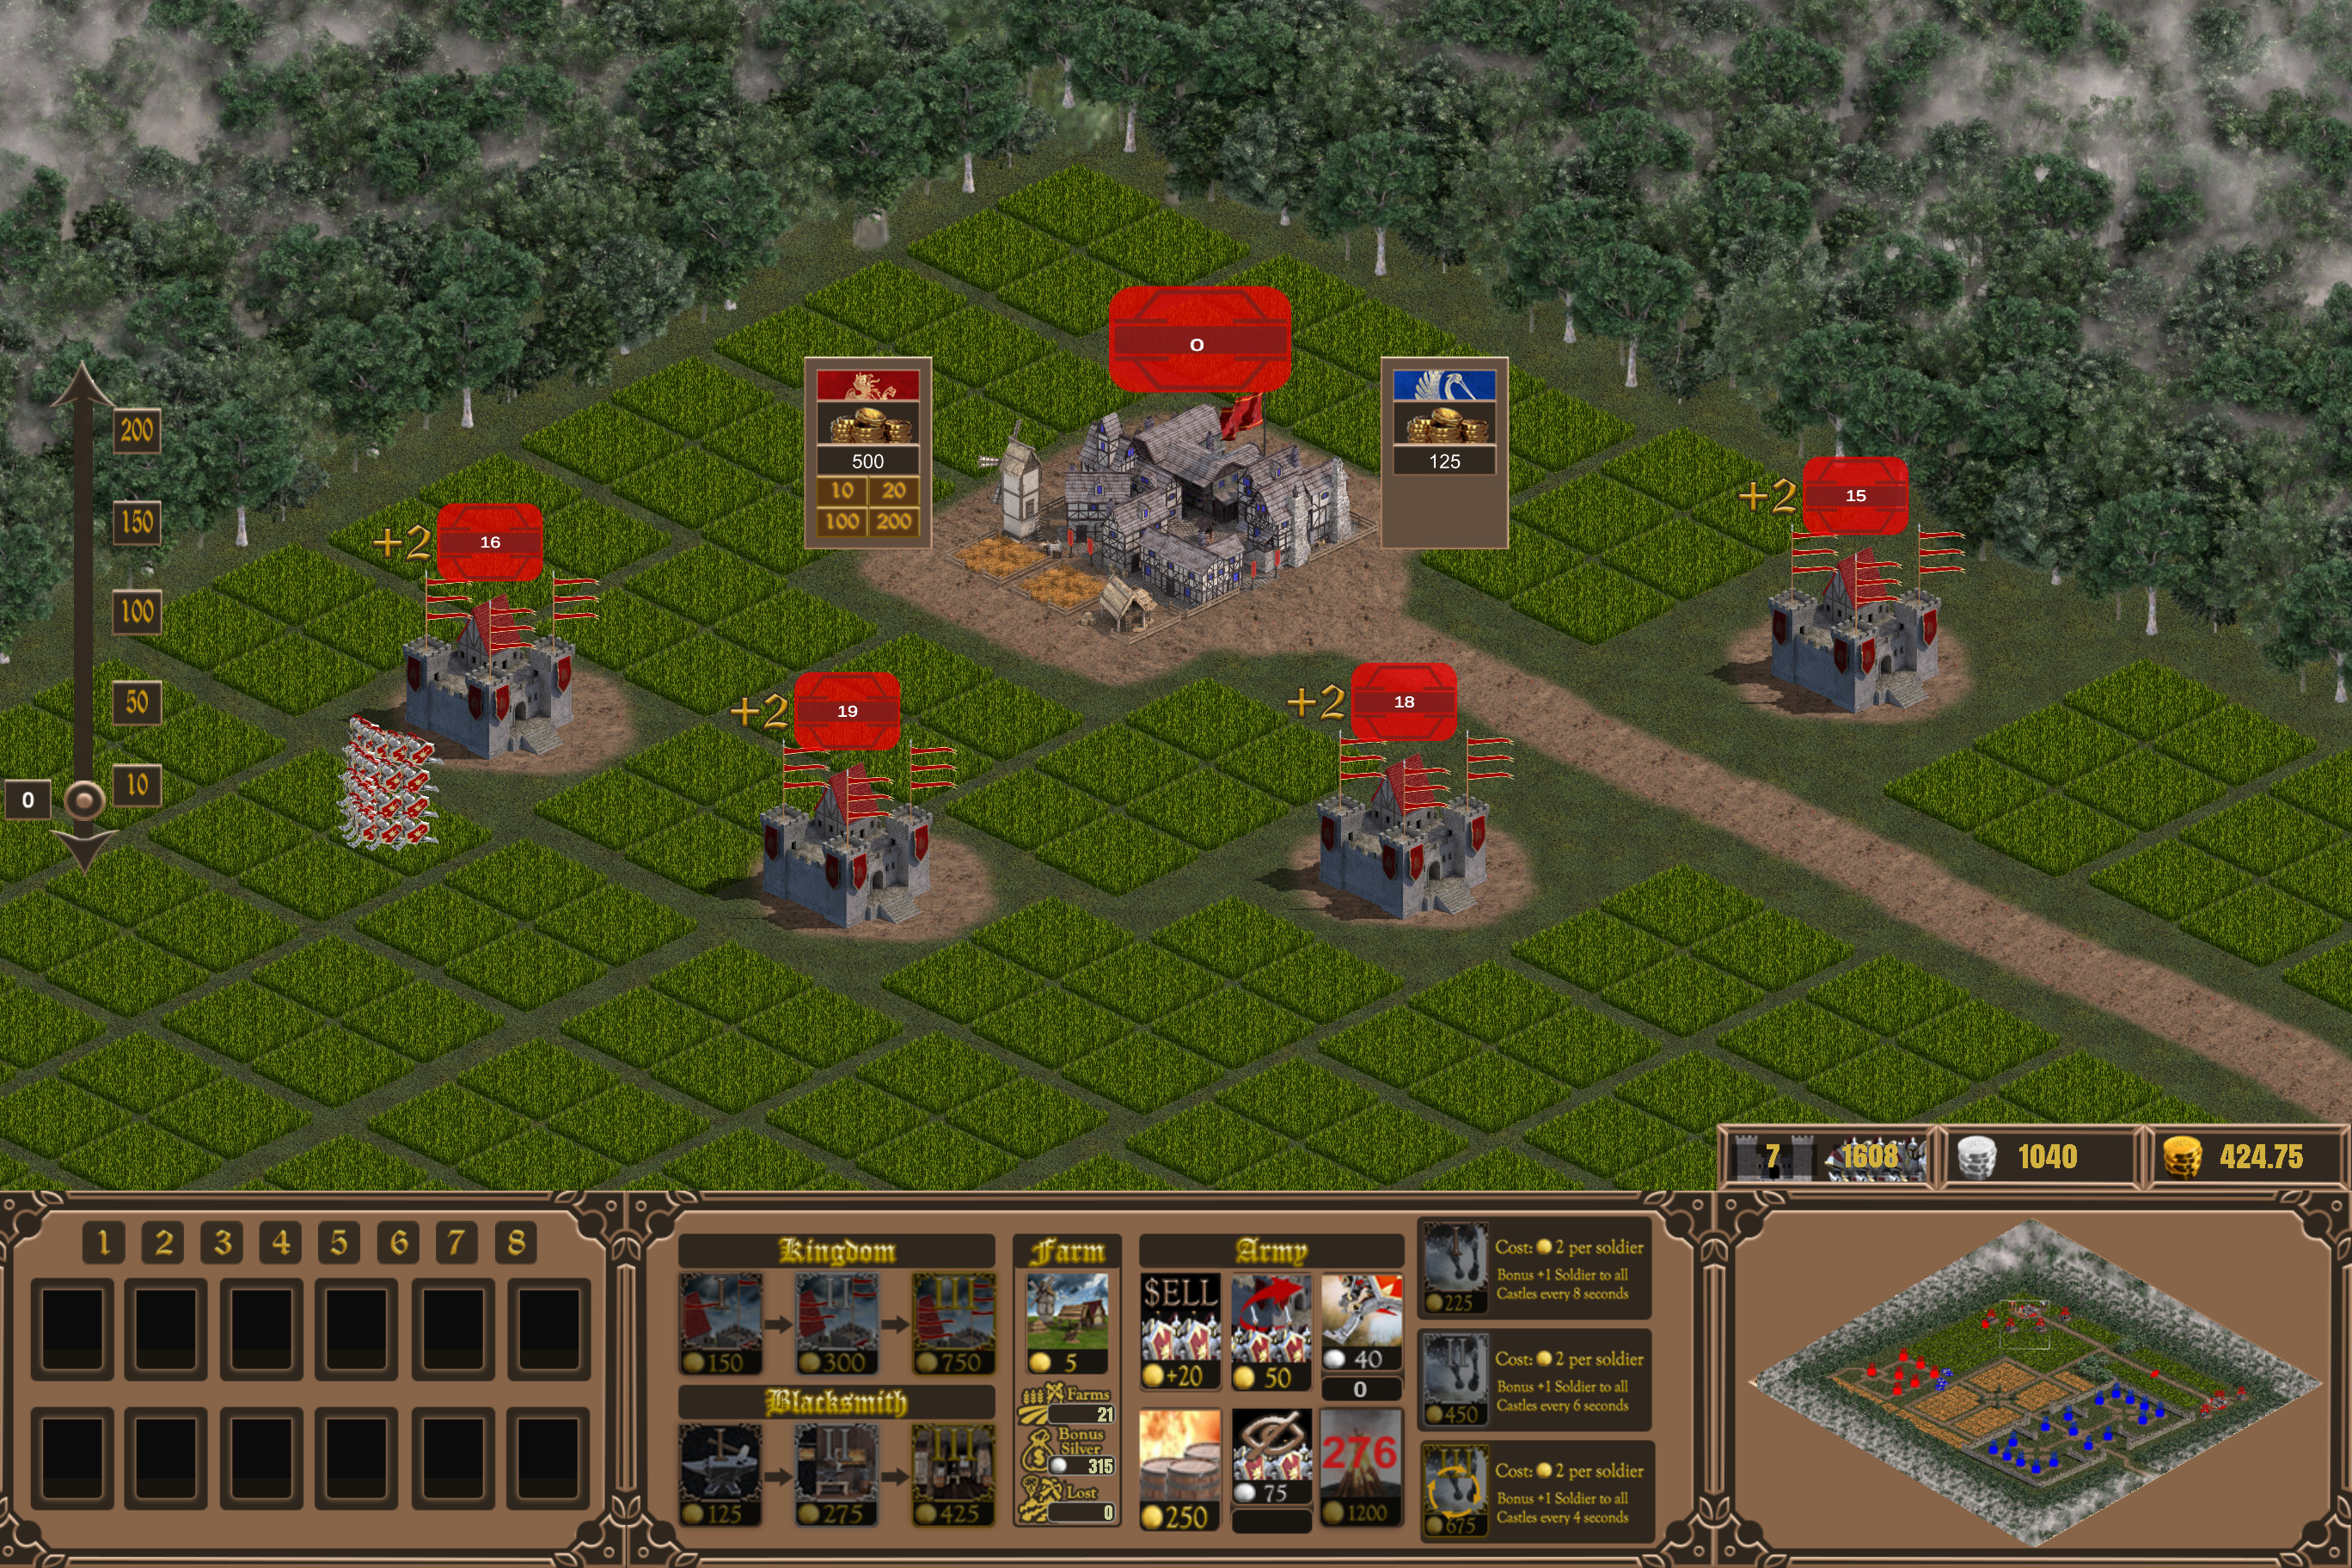 March Of Soldiers screenshot